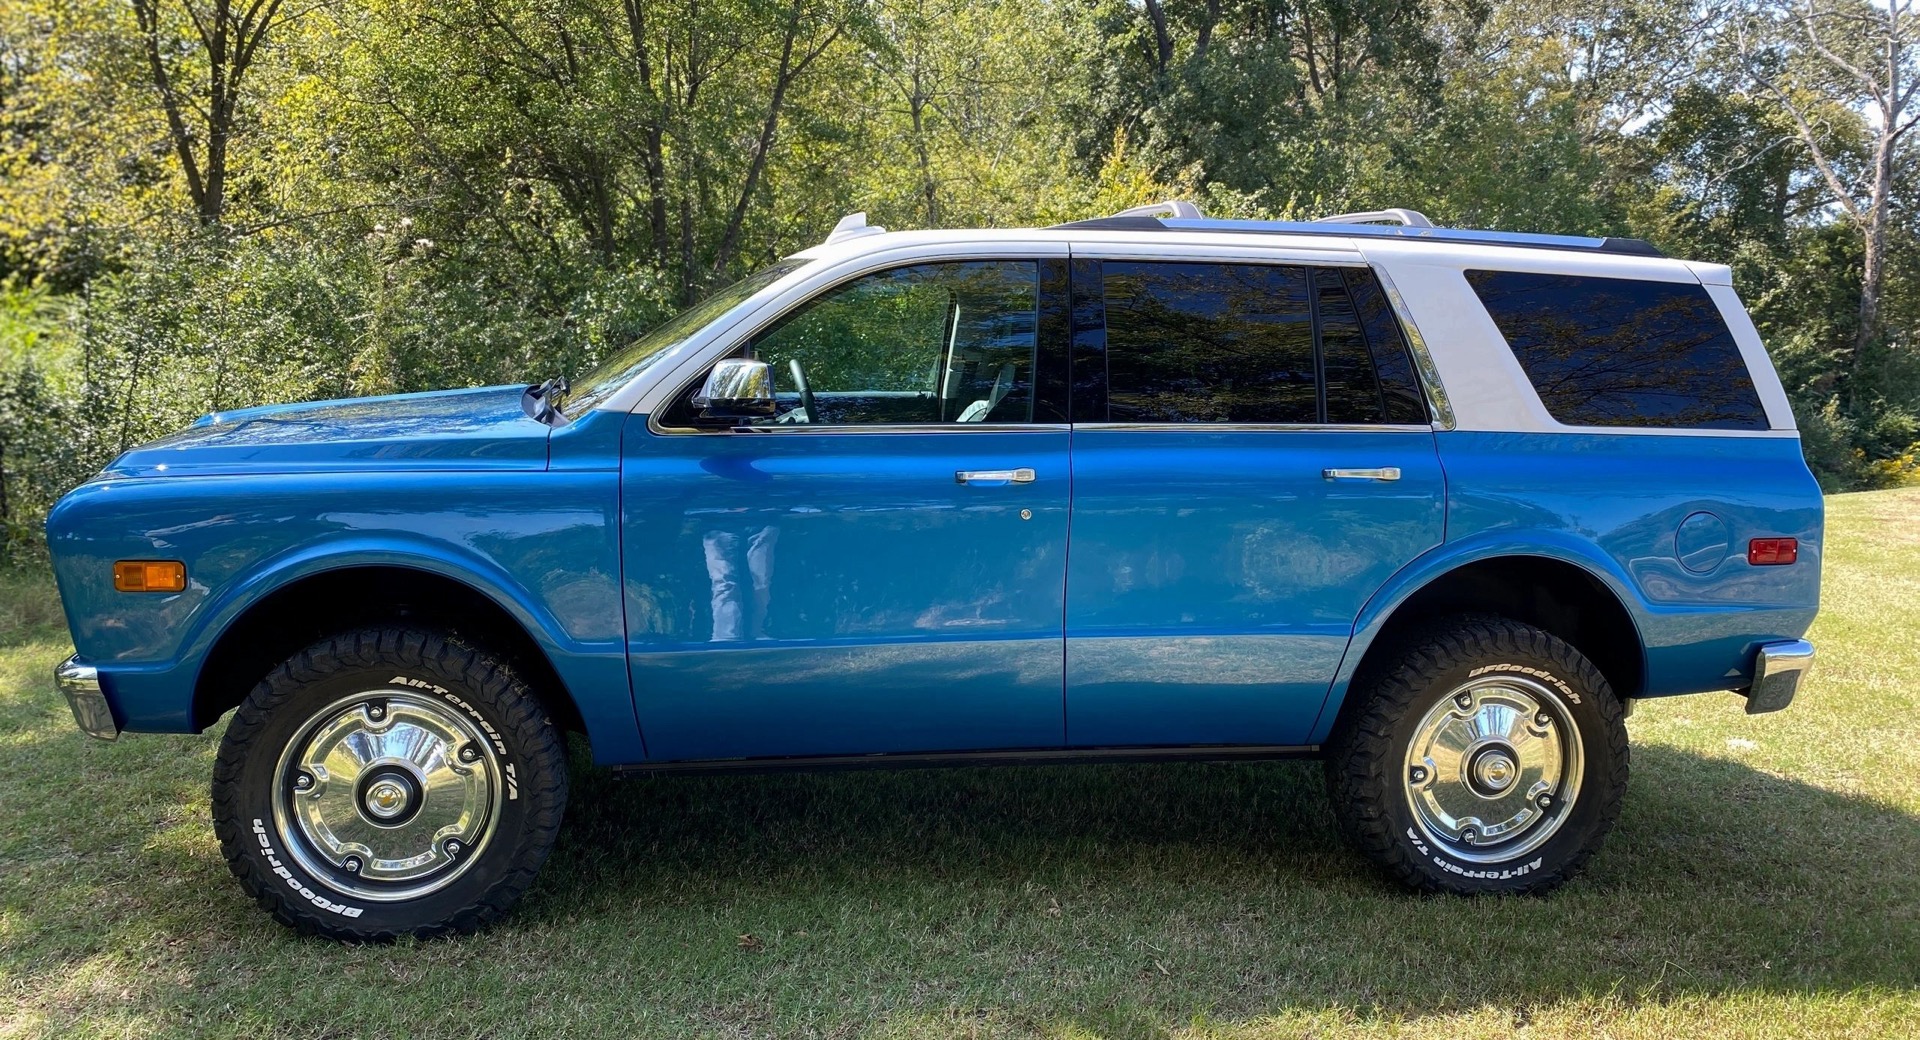 This Modern Day Chevy K5 Blazer Will Cost You 70,000 And A Tahoe, But